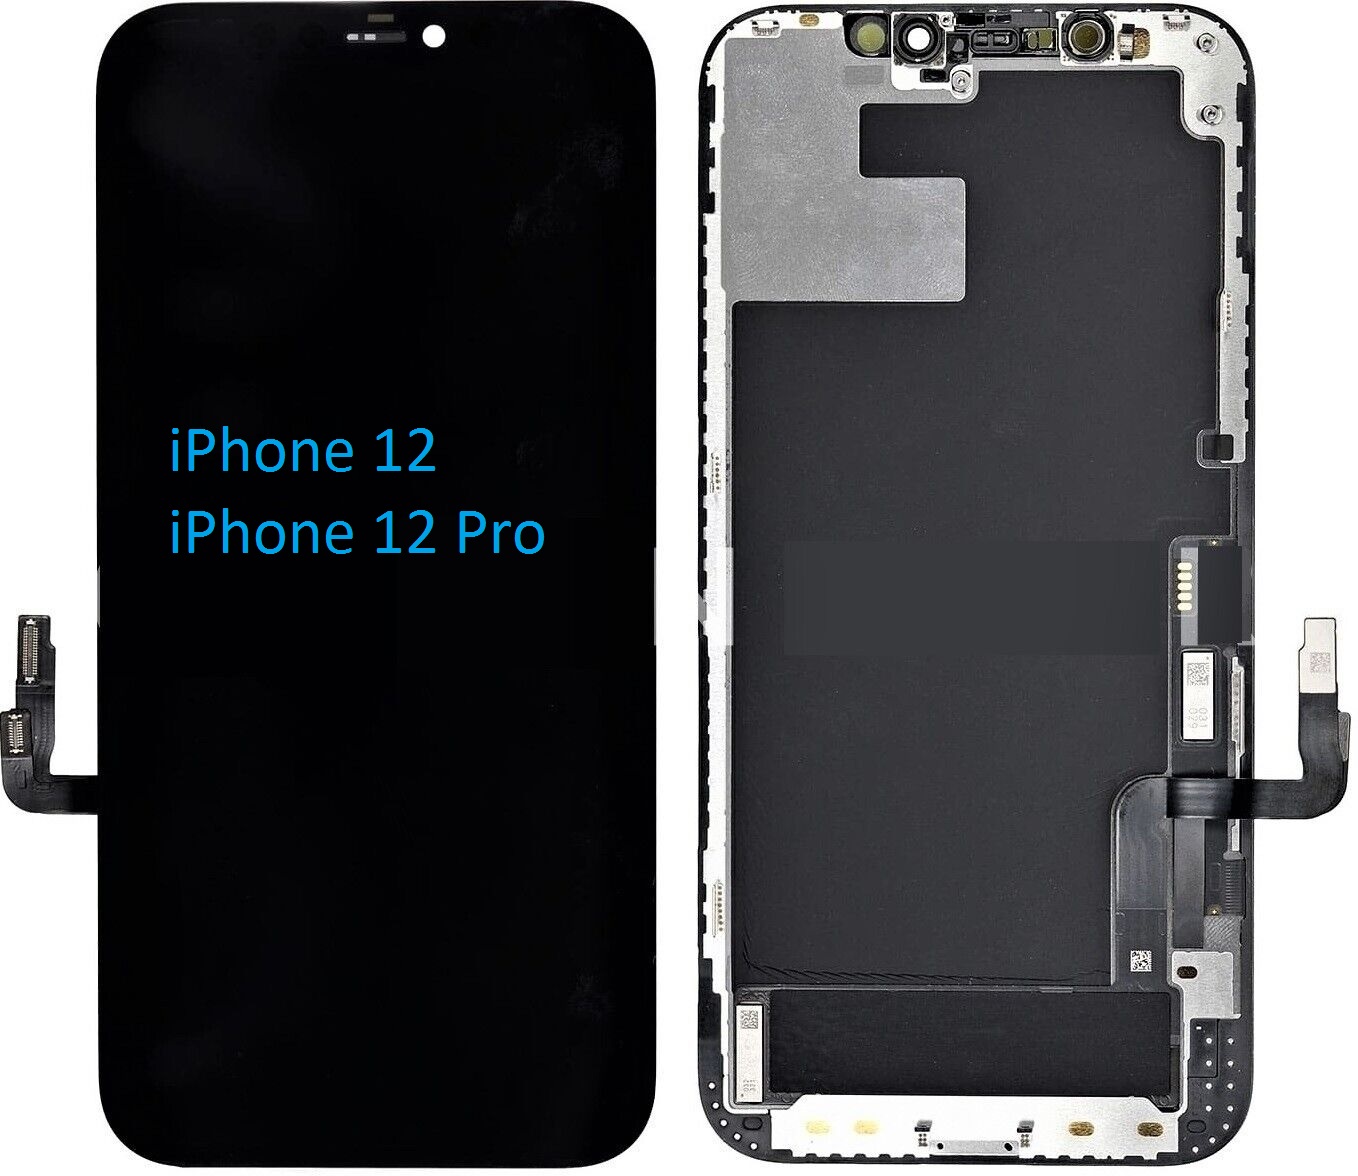 Jual LCD iPhone 12-iPhone 12 Pro